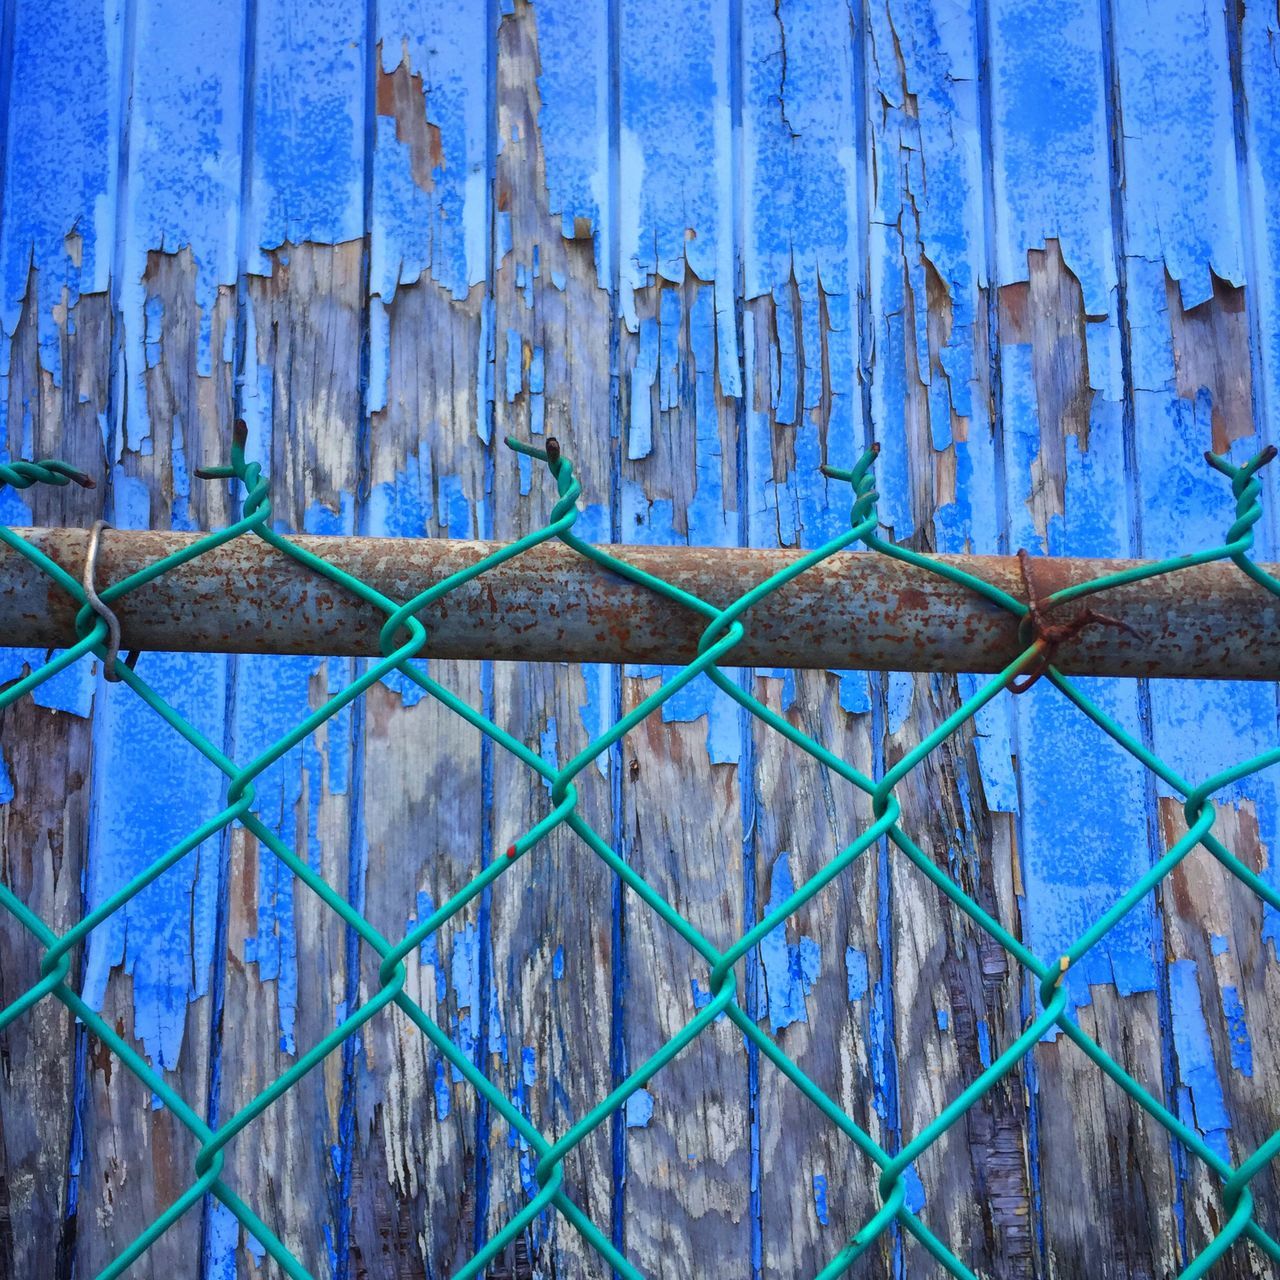 full frame, backgrounds, blue, metal, protection, built structure, pattern, safety, architecture, textured, wall - building feature, close-up, security, weathered, fence, closed, rusty, building exterior, metallic, old